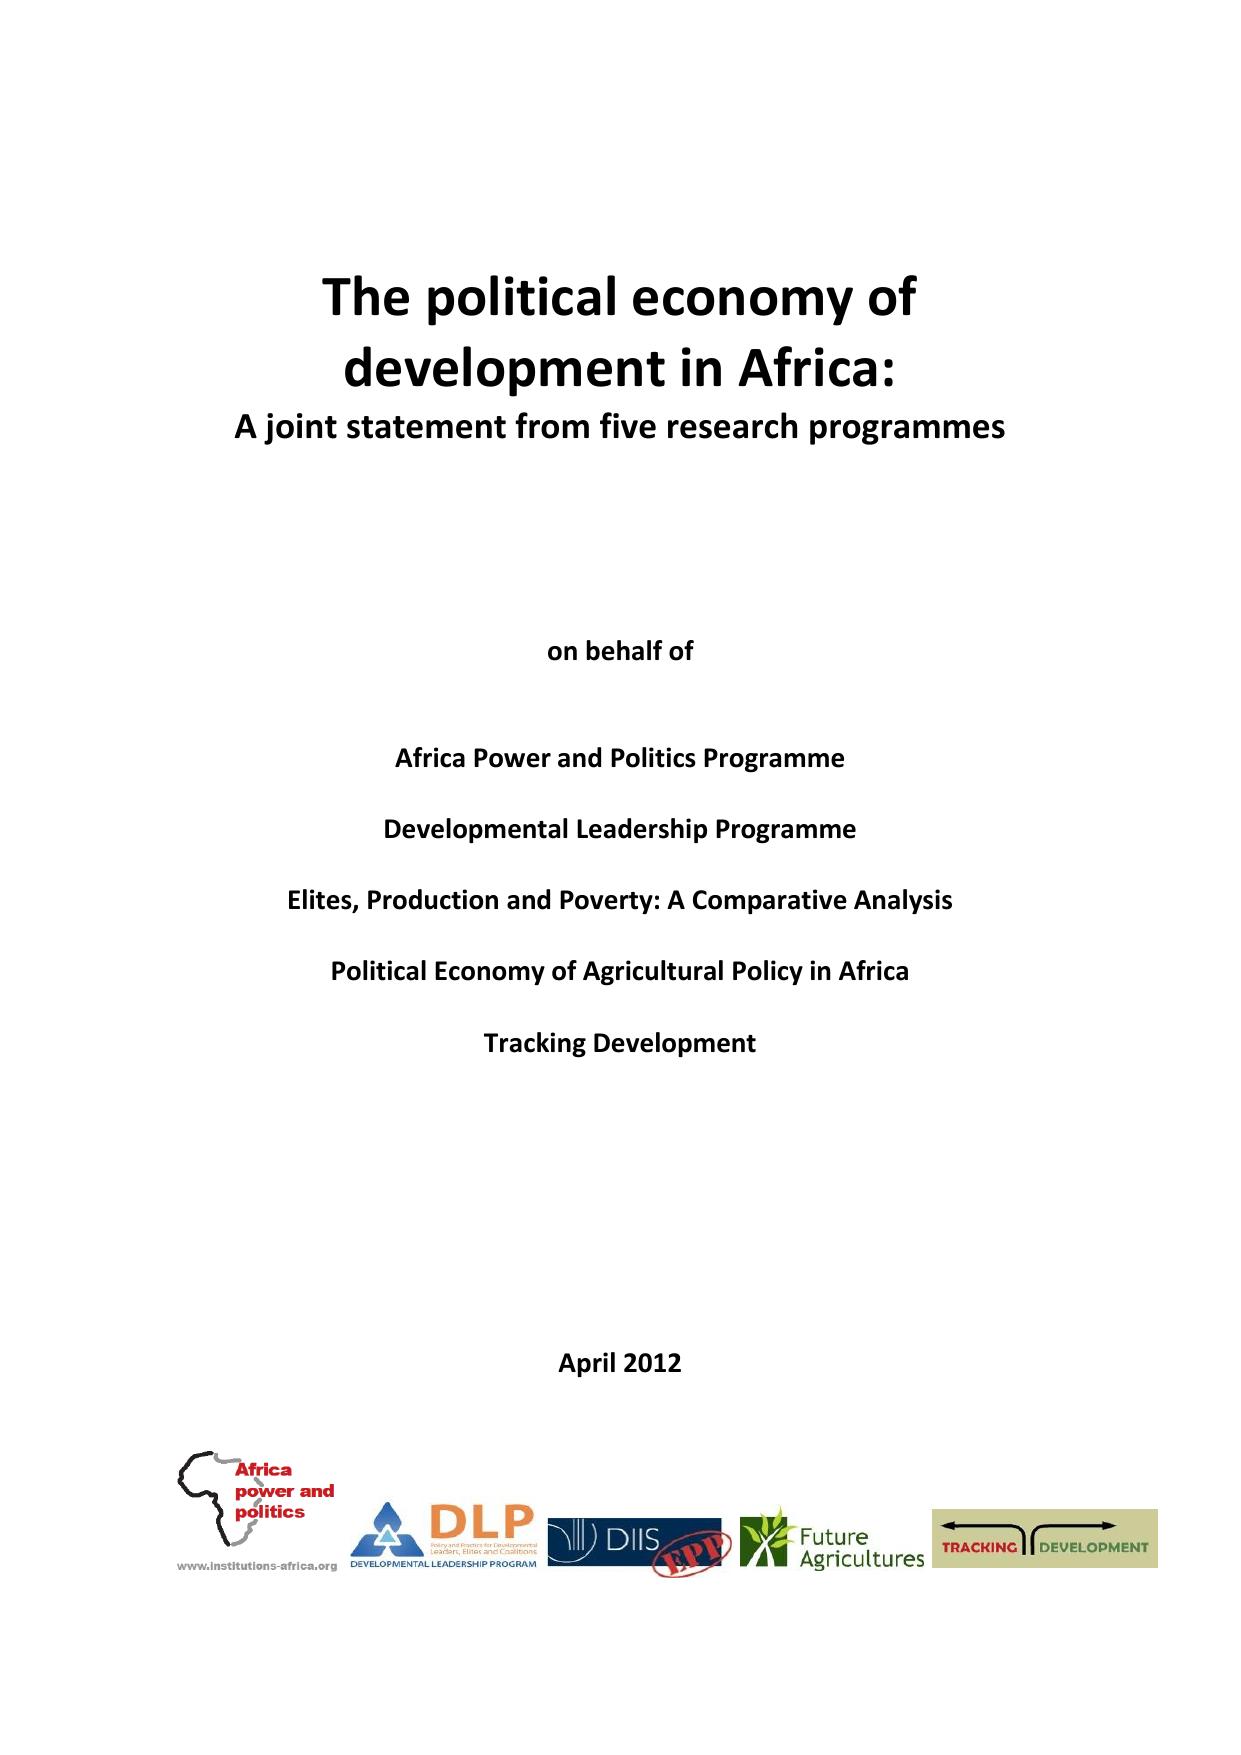 The political economy of development in Africa: A joint statement from five research programmes